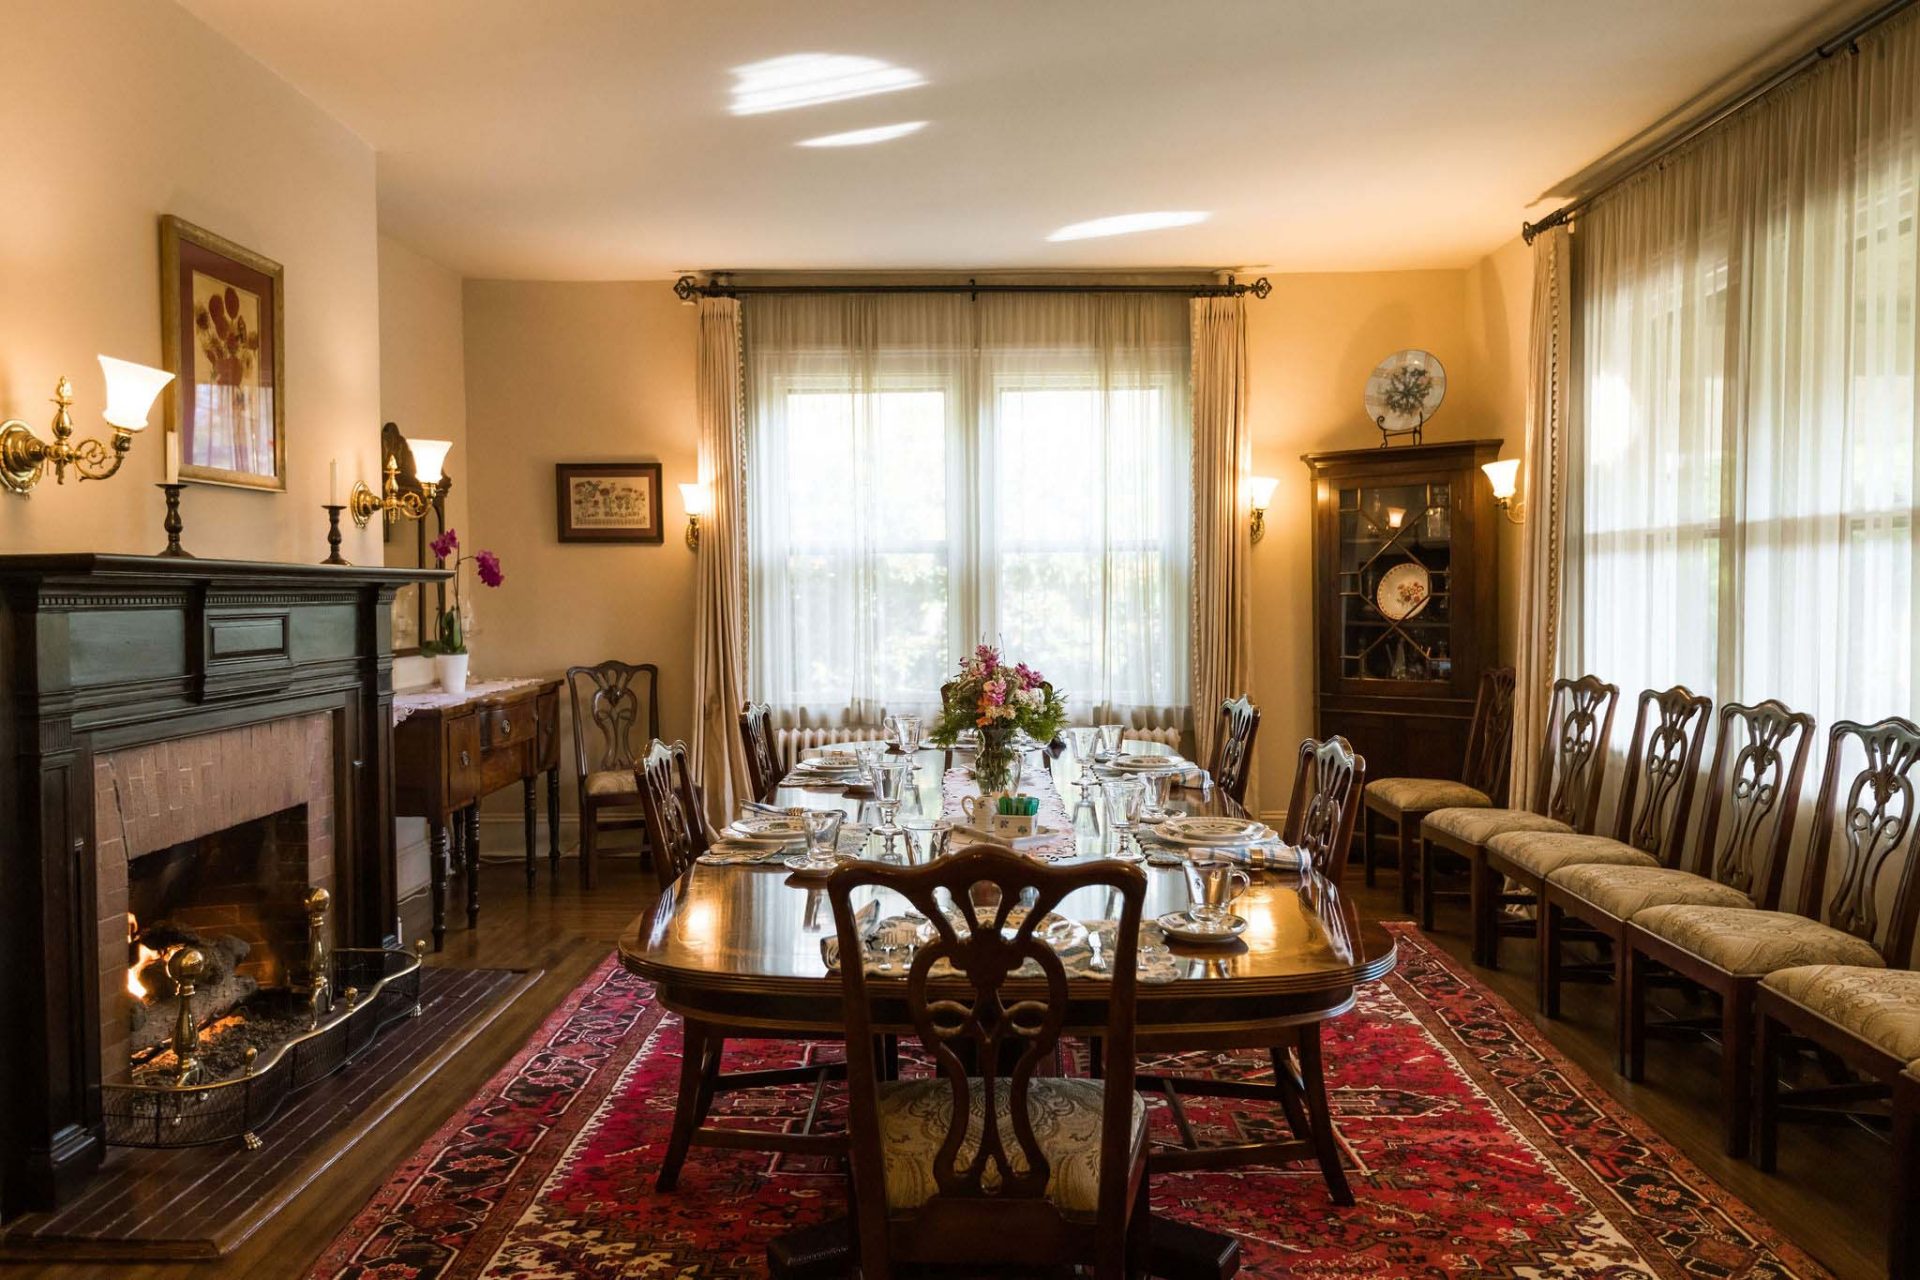 A spacious dining room area with a big, dark wood dining table with wooden chairs, a fireplace on the sidewall, a dark wood dresser with decorative ceramics in the corner. Big windows with sheer curtains.